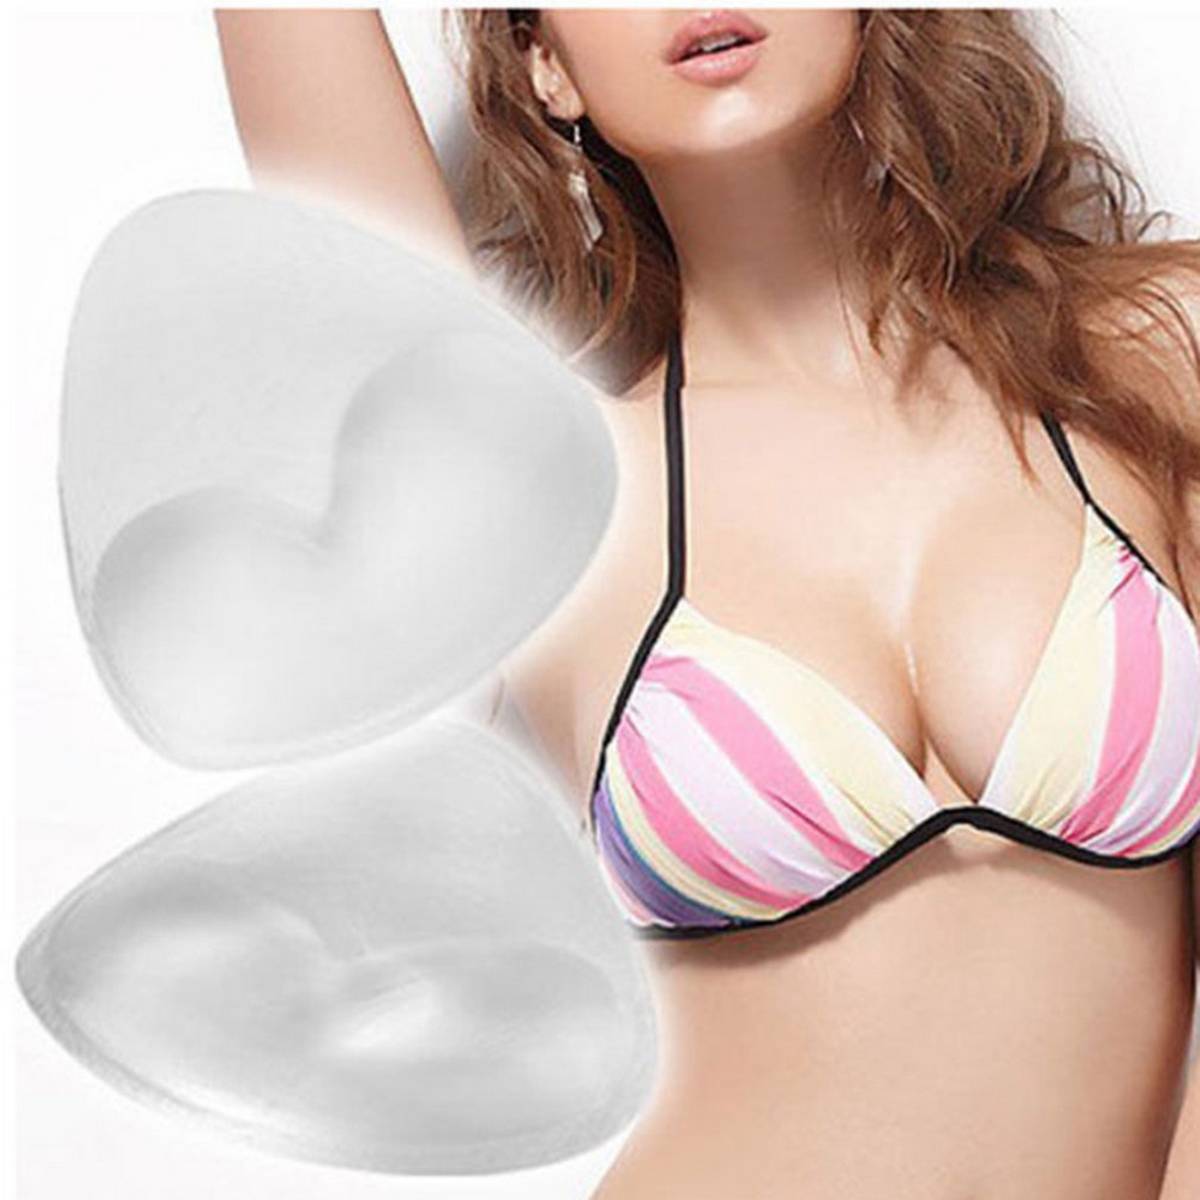 Buy Silicon Gel Bra Push Up Pads online